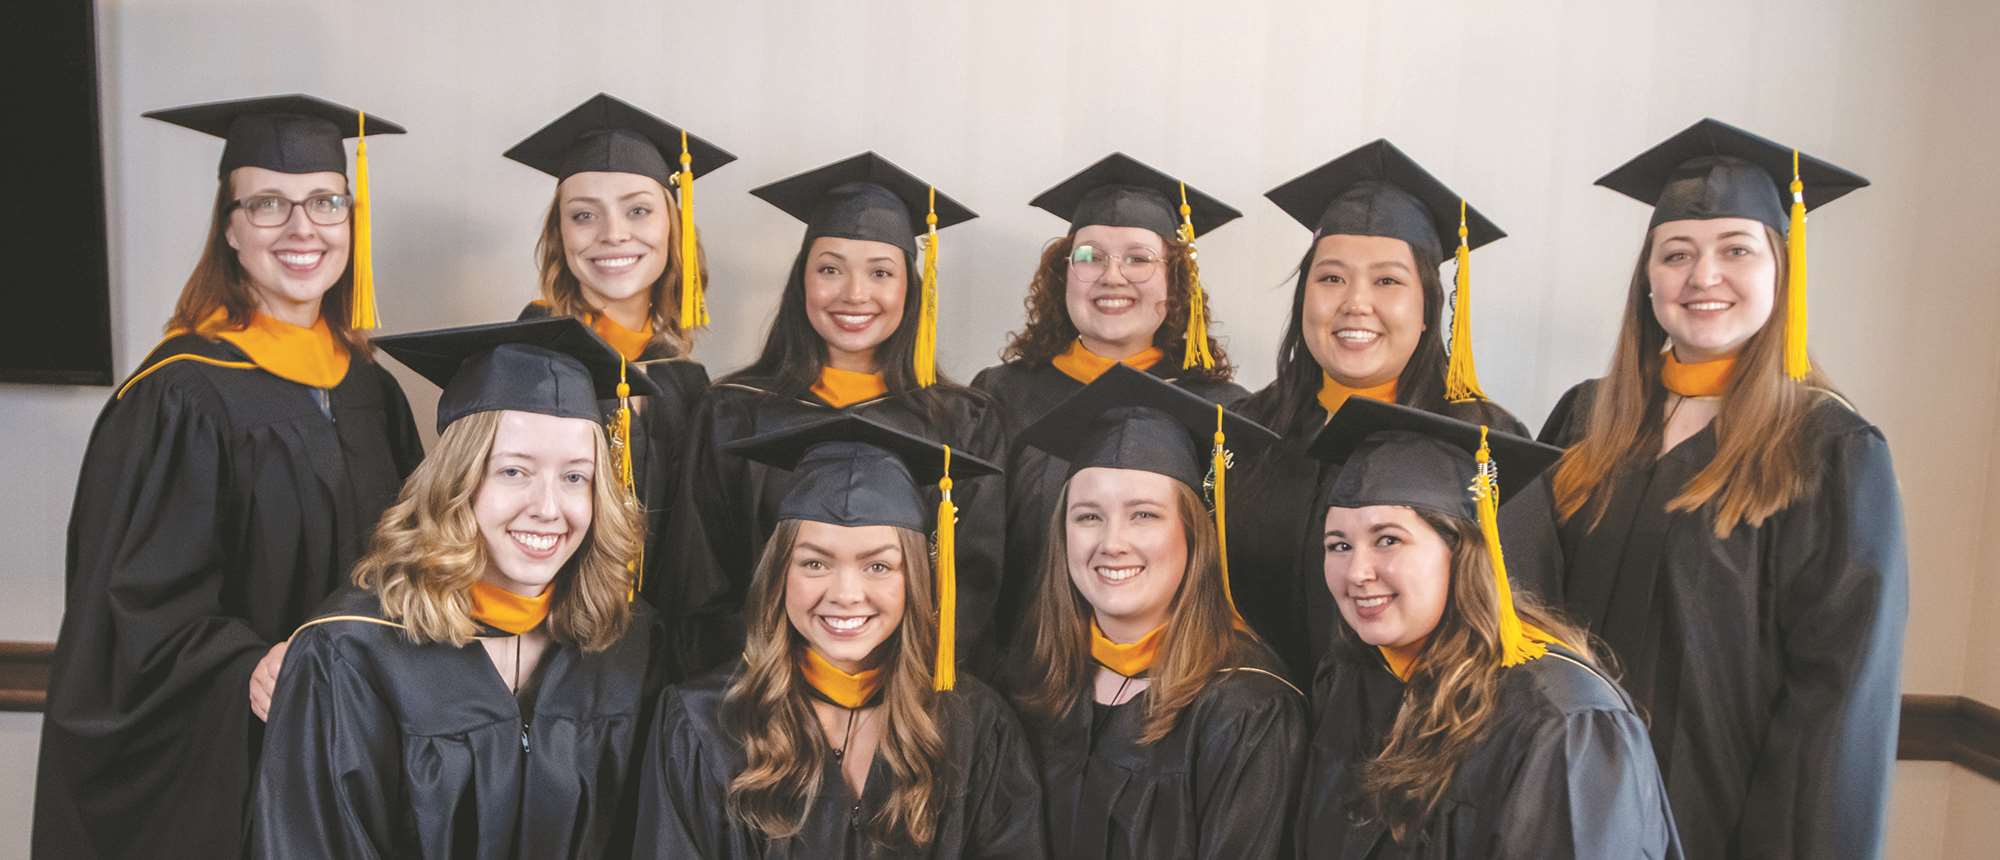 ӰԺ MS in Genetic Counseling Program graduates first class